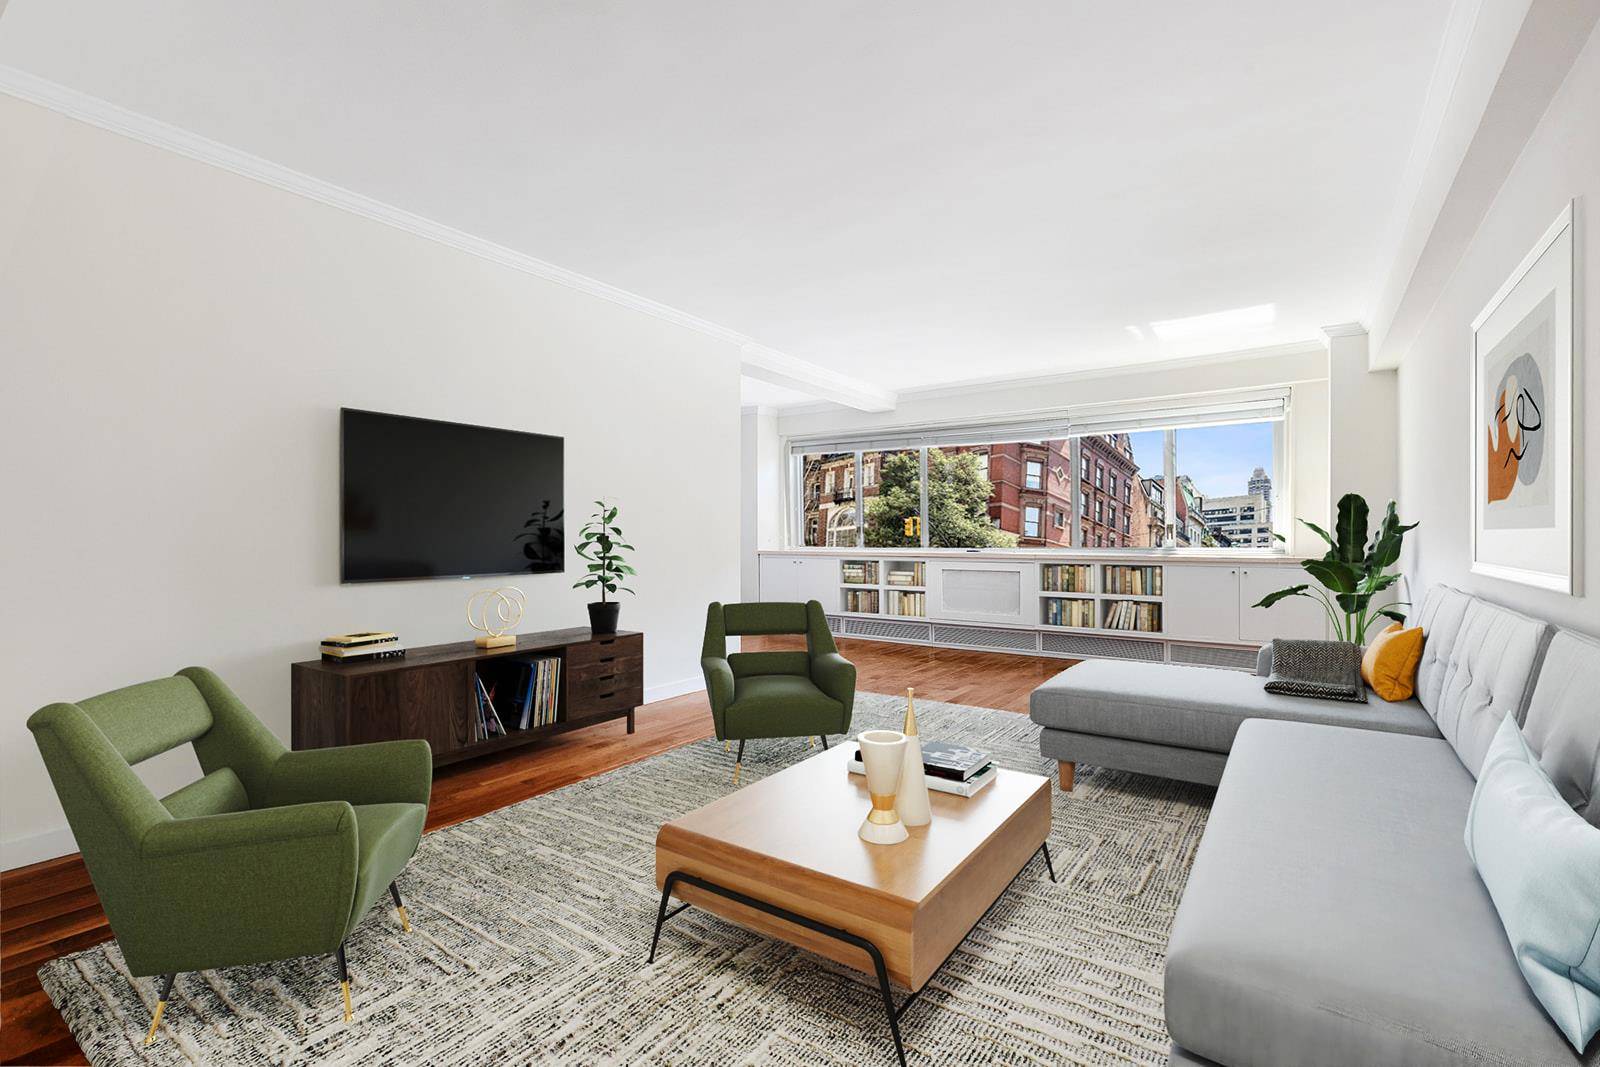 Coveted Corner 2 beds, 2 baths residence in Prime UES Cond opResidence 3C boasts a large entry foyer that welcomes you to your light filled two bedroom, two bathroom home.